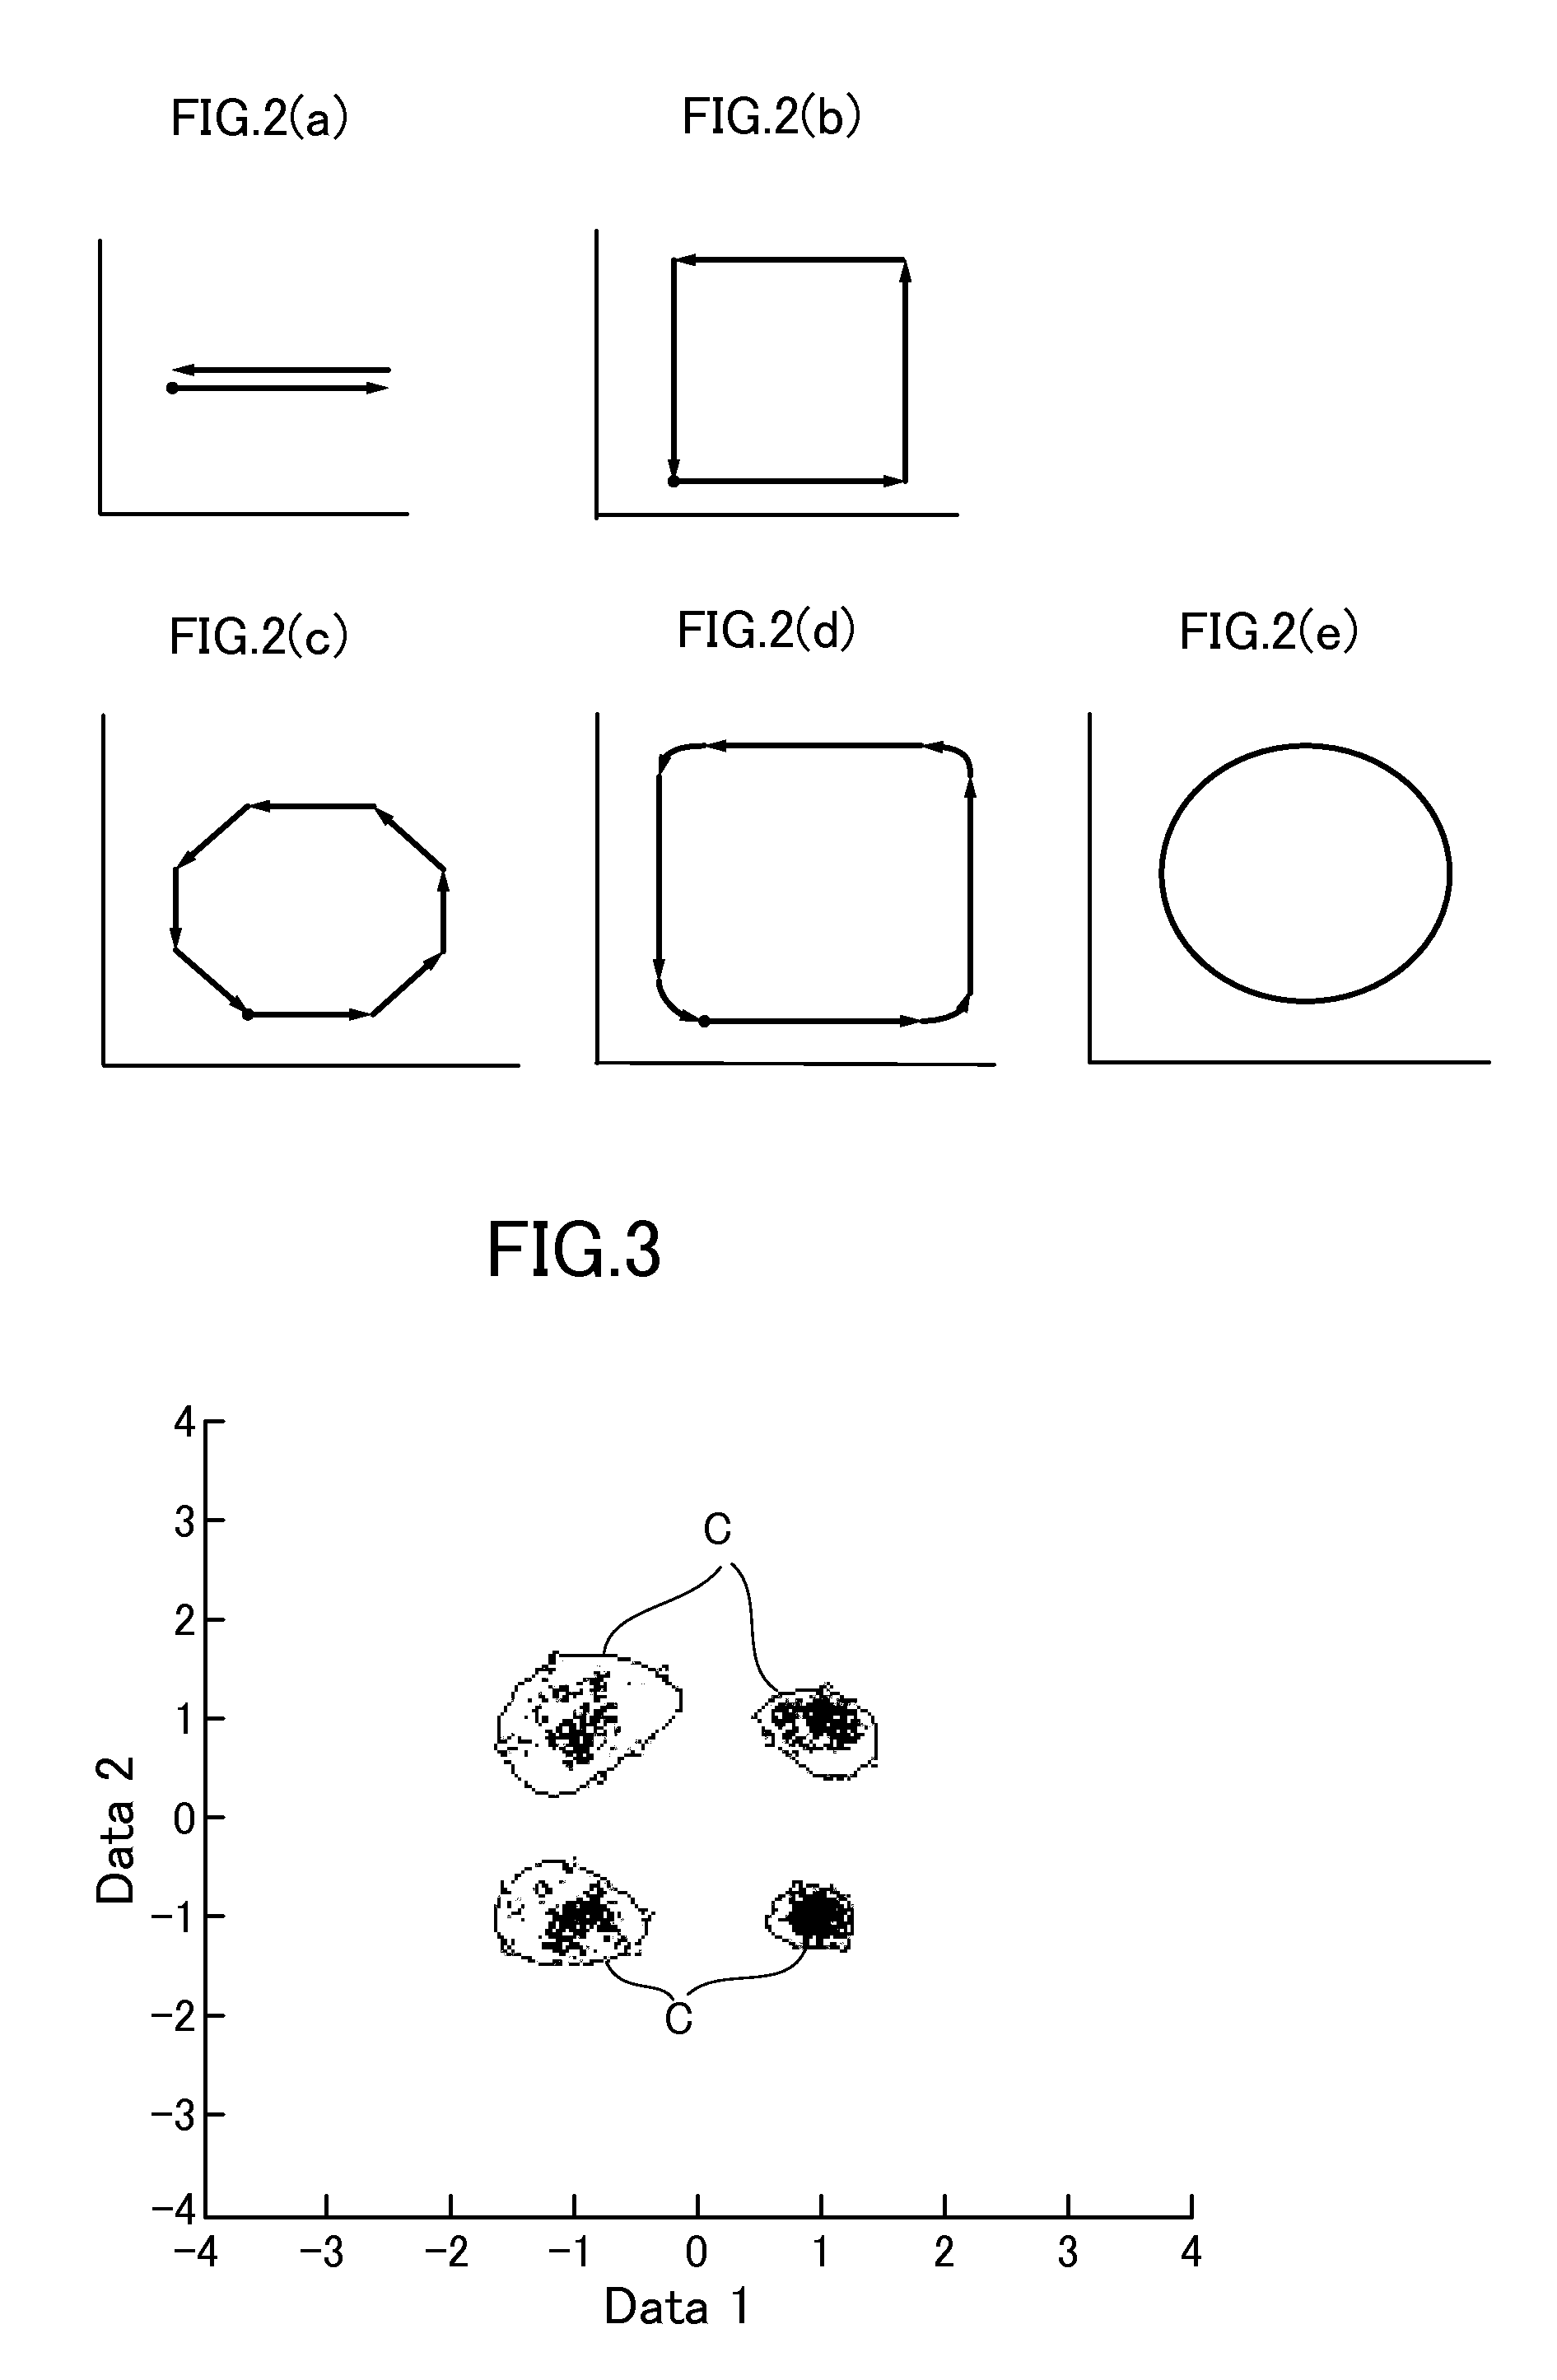 Machine tool diagnostic method and system